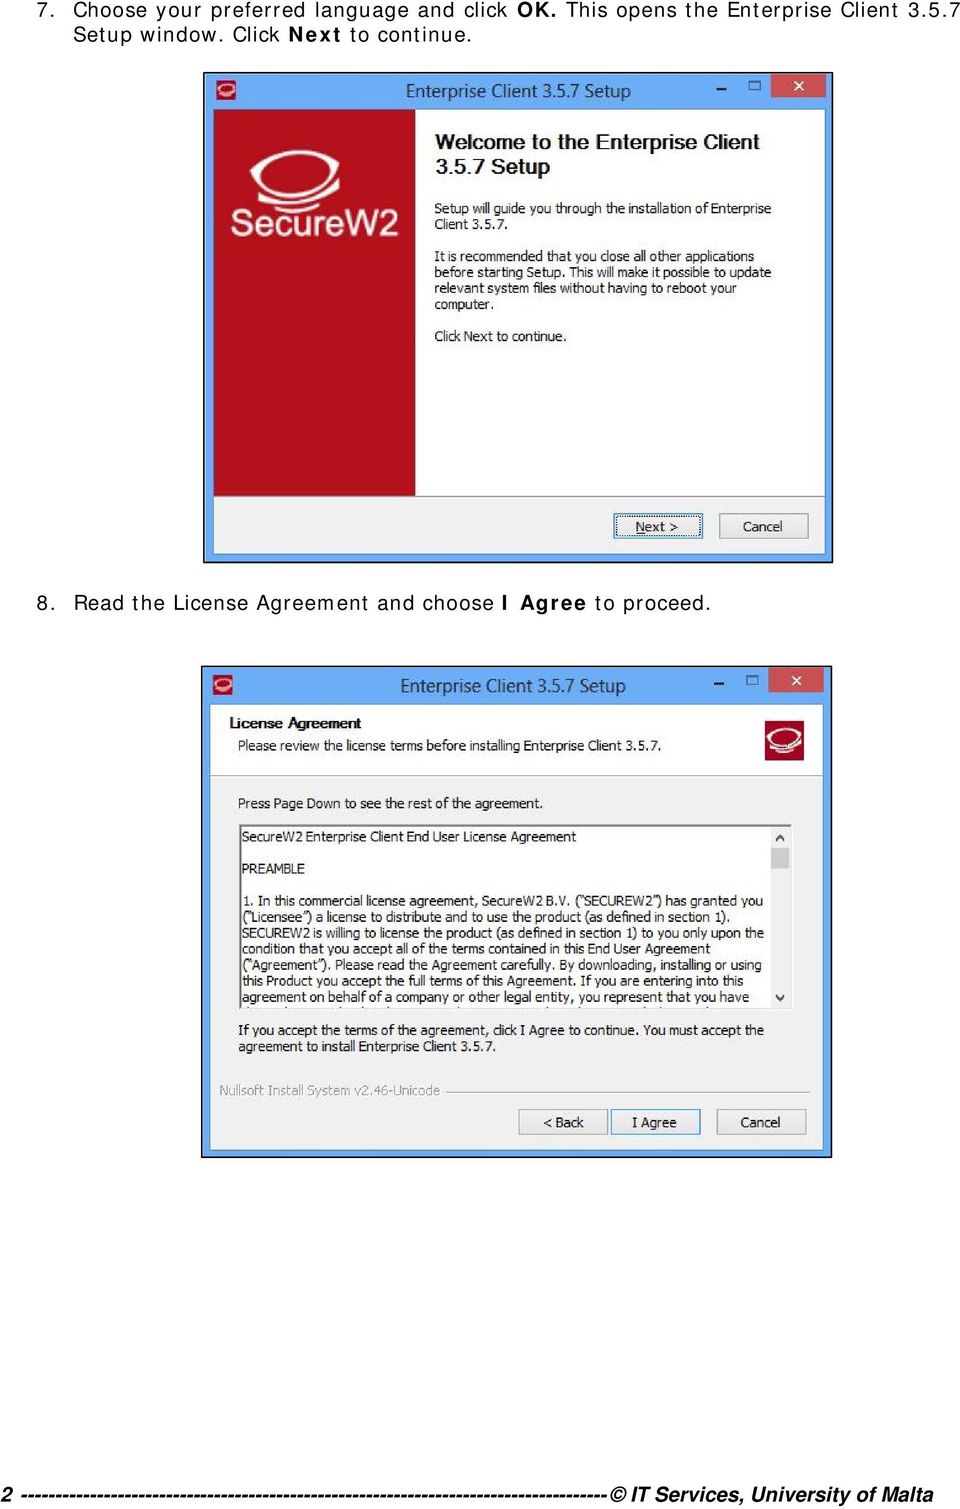 8. Read the License Agreement and choose I Agree to proceed.